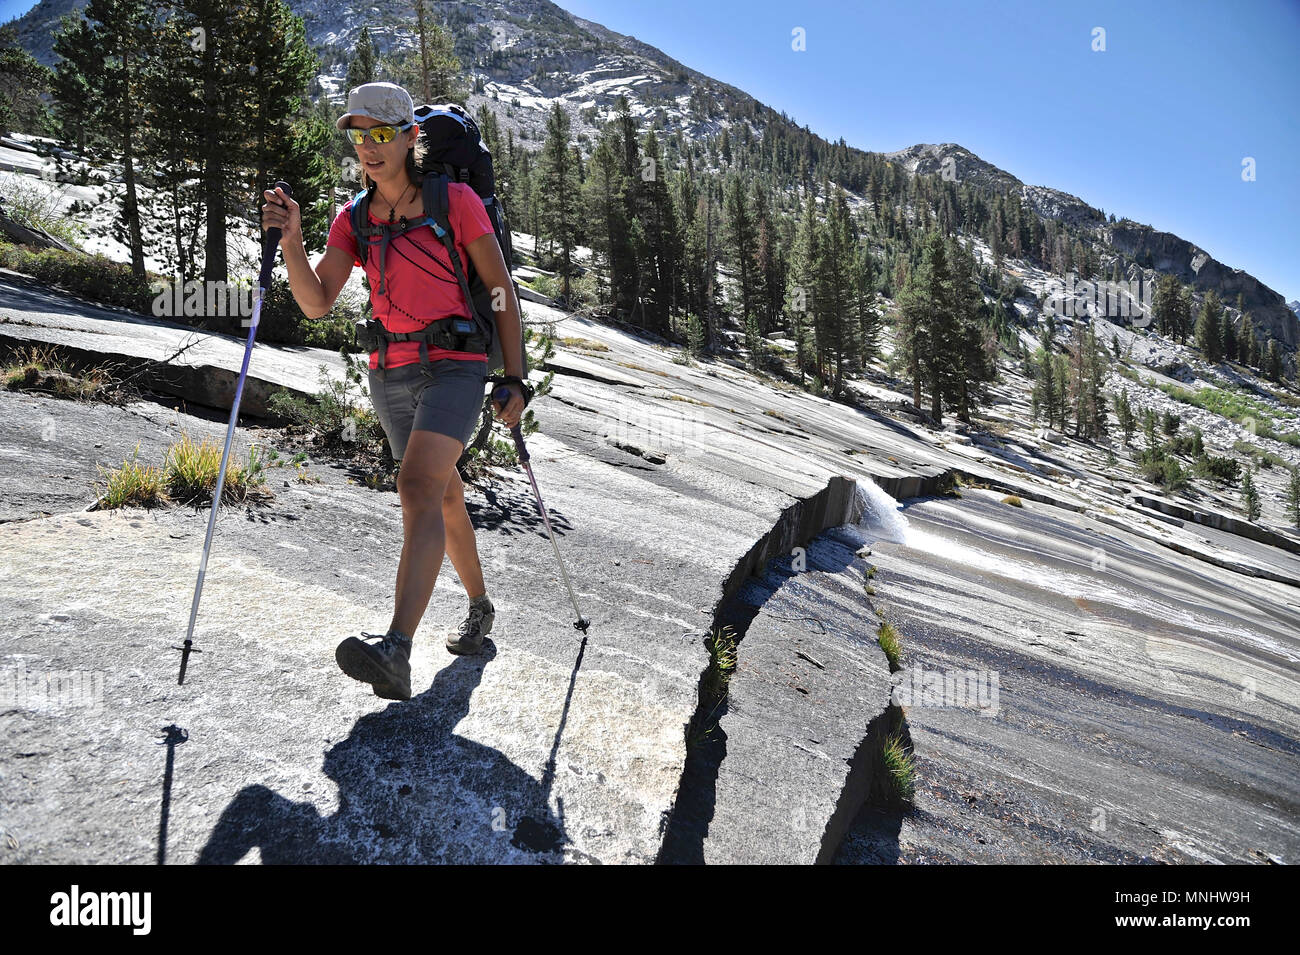 Backpacker hiking across a granite slab on the Bishop Pass Trail out of Dusy Basin into Le Conte Canyon on a two-week trek of the Sierra High Route in Kings Canyon National Park in California. The 200-mile route roughly parallels the popular John Muir Trail through the Sierra Nevada Range of California from Kings Canyon National Park to Yosemite National Park. Stock Photo